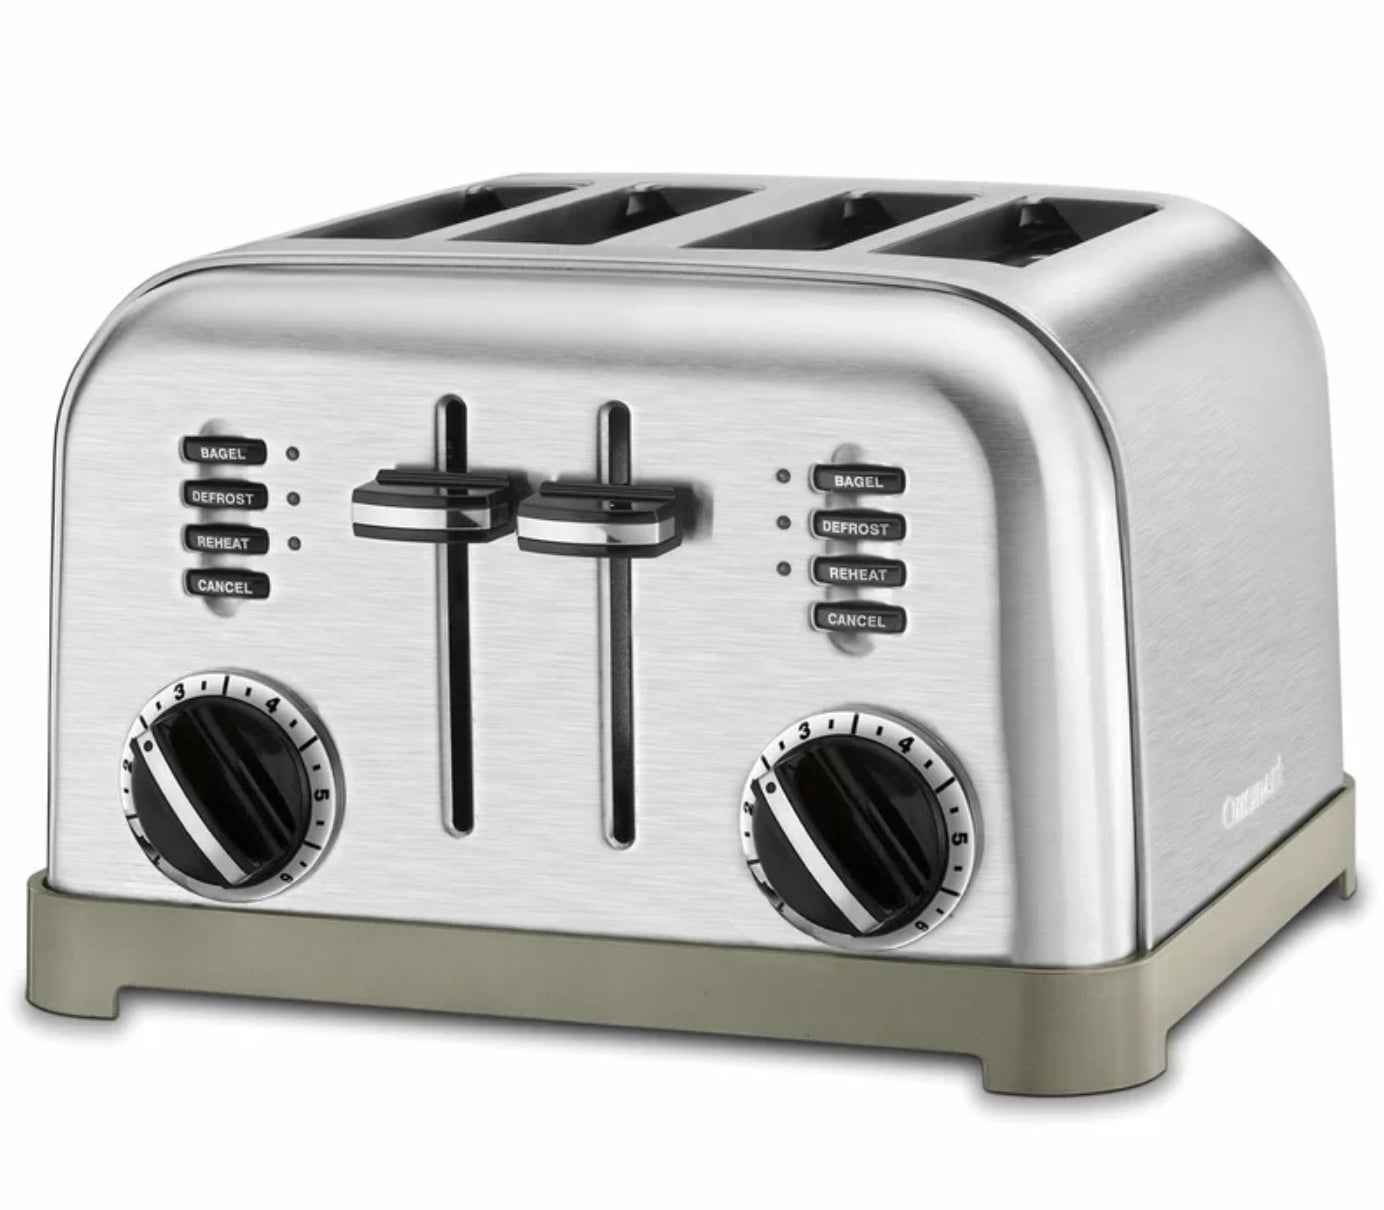 The Cuisinart four-slice toaster in black